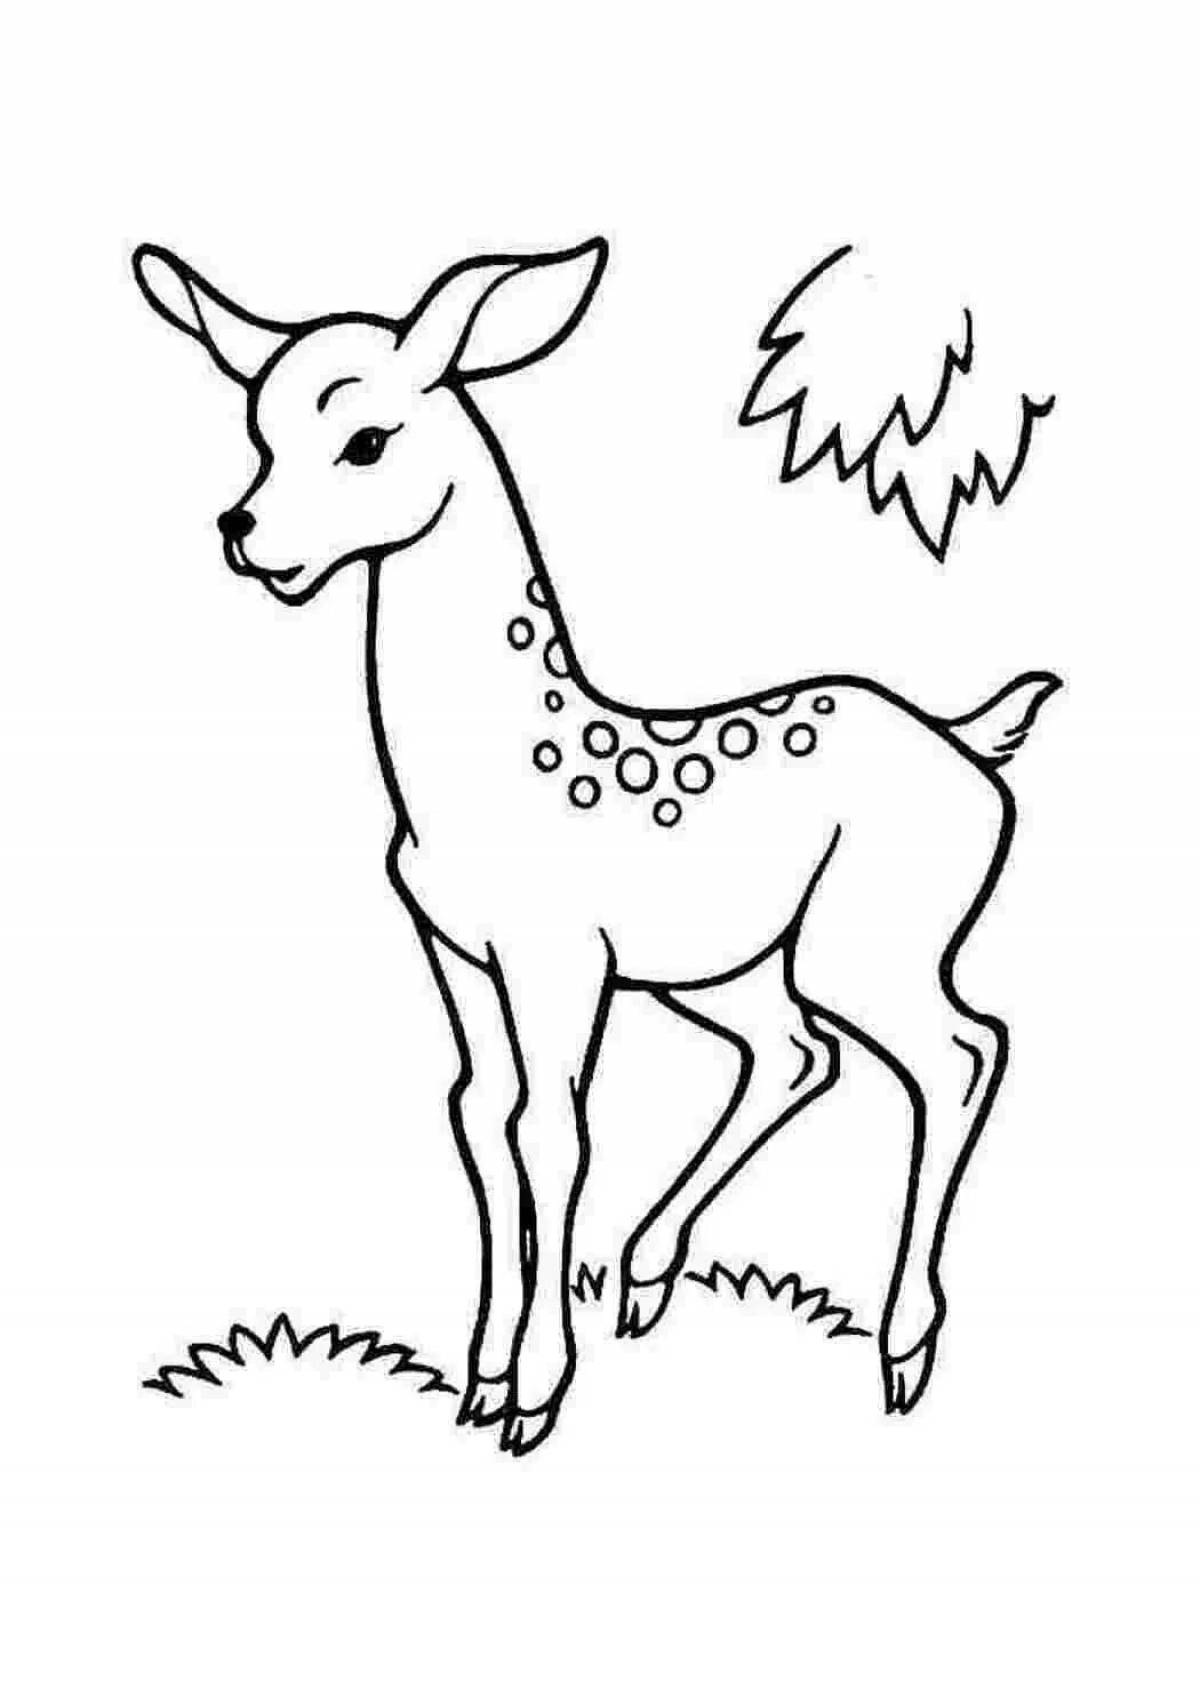 Funny drawing of a deer